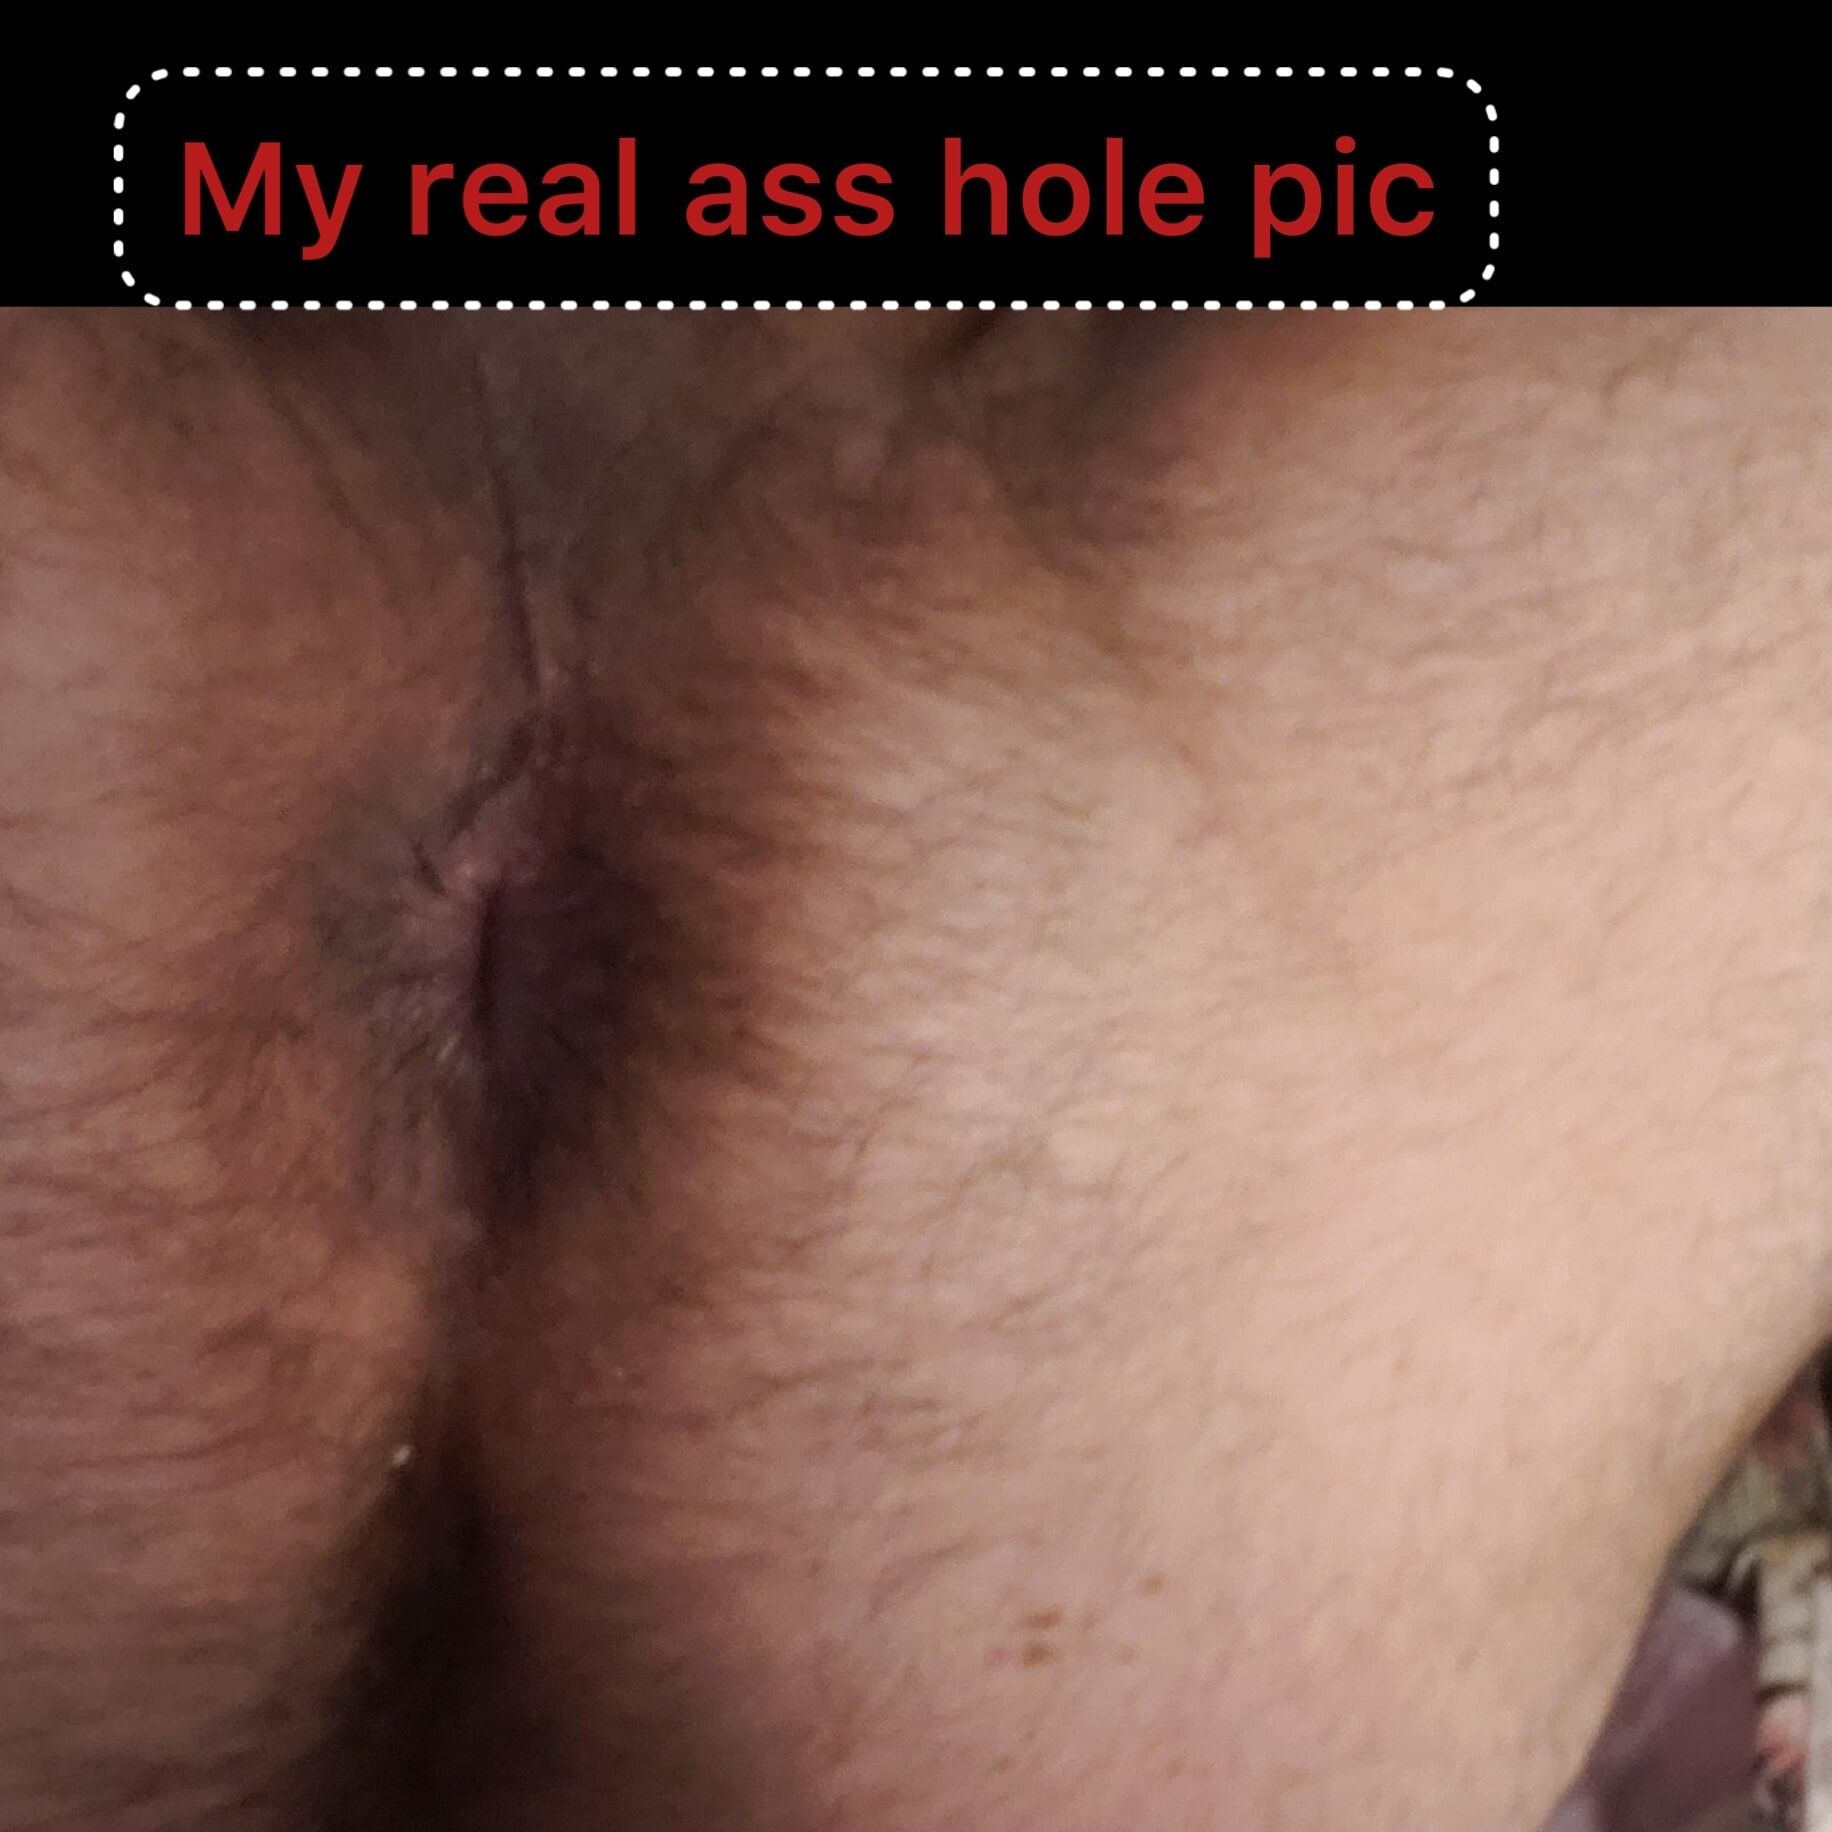 My new nudes naked my ass hole pic 